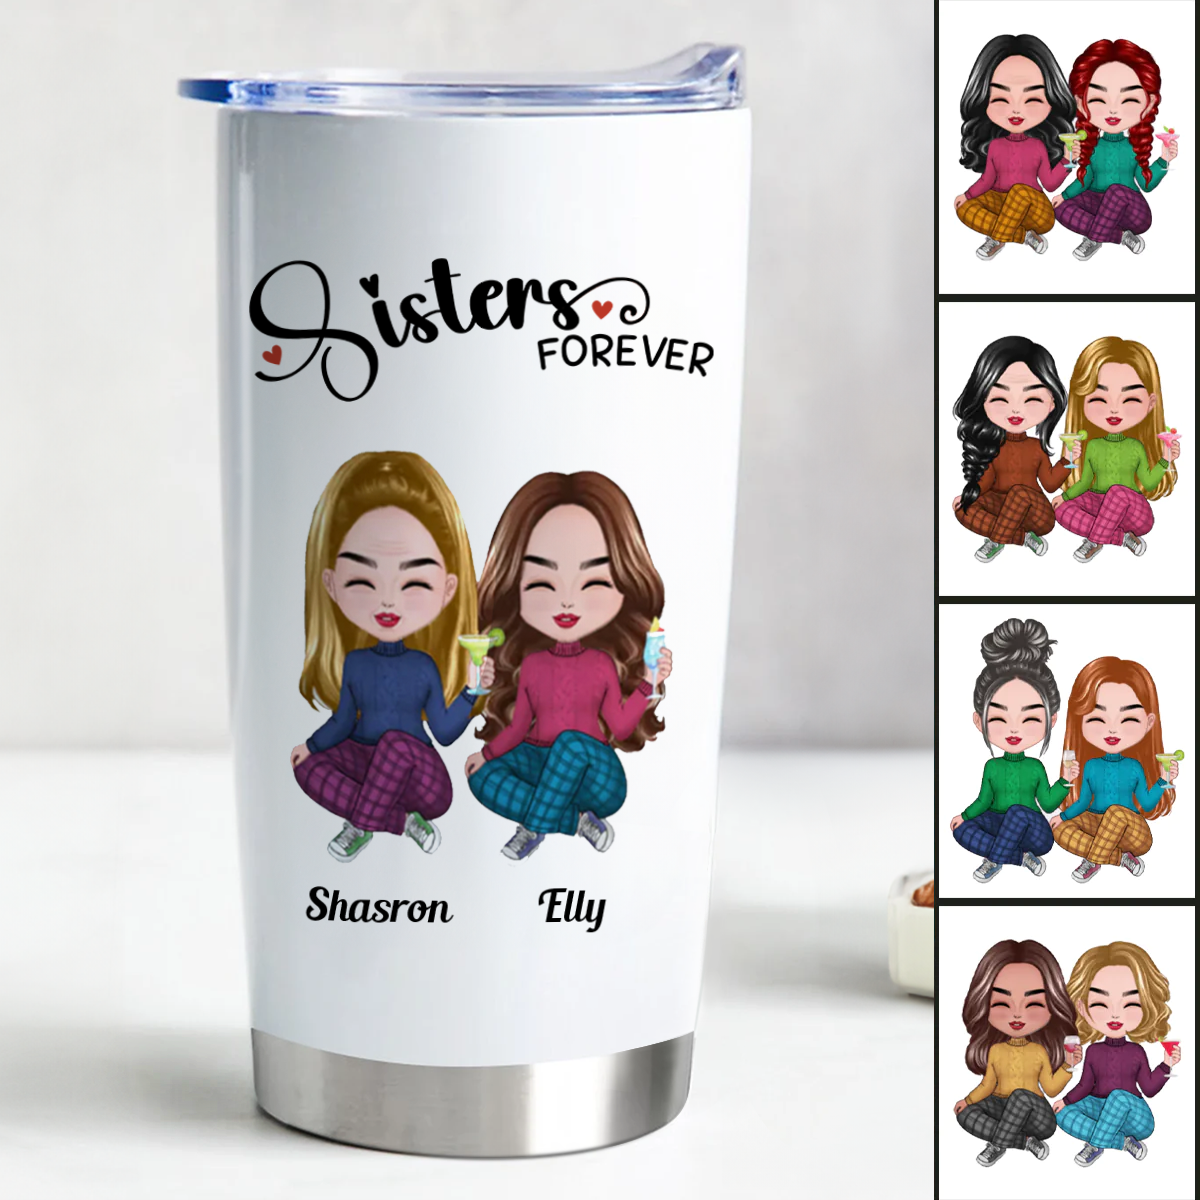 Blessed Mama Custom Tumbler  Mother's Day Gift – Intricut Creations